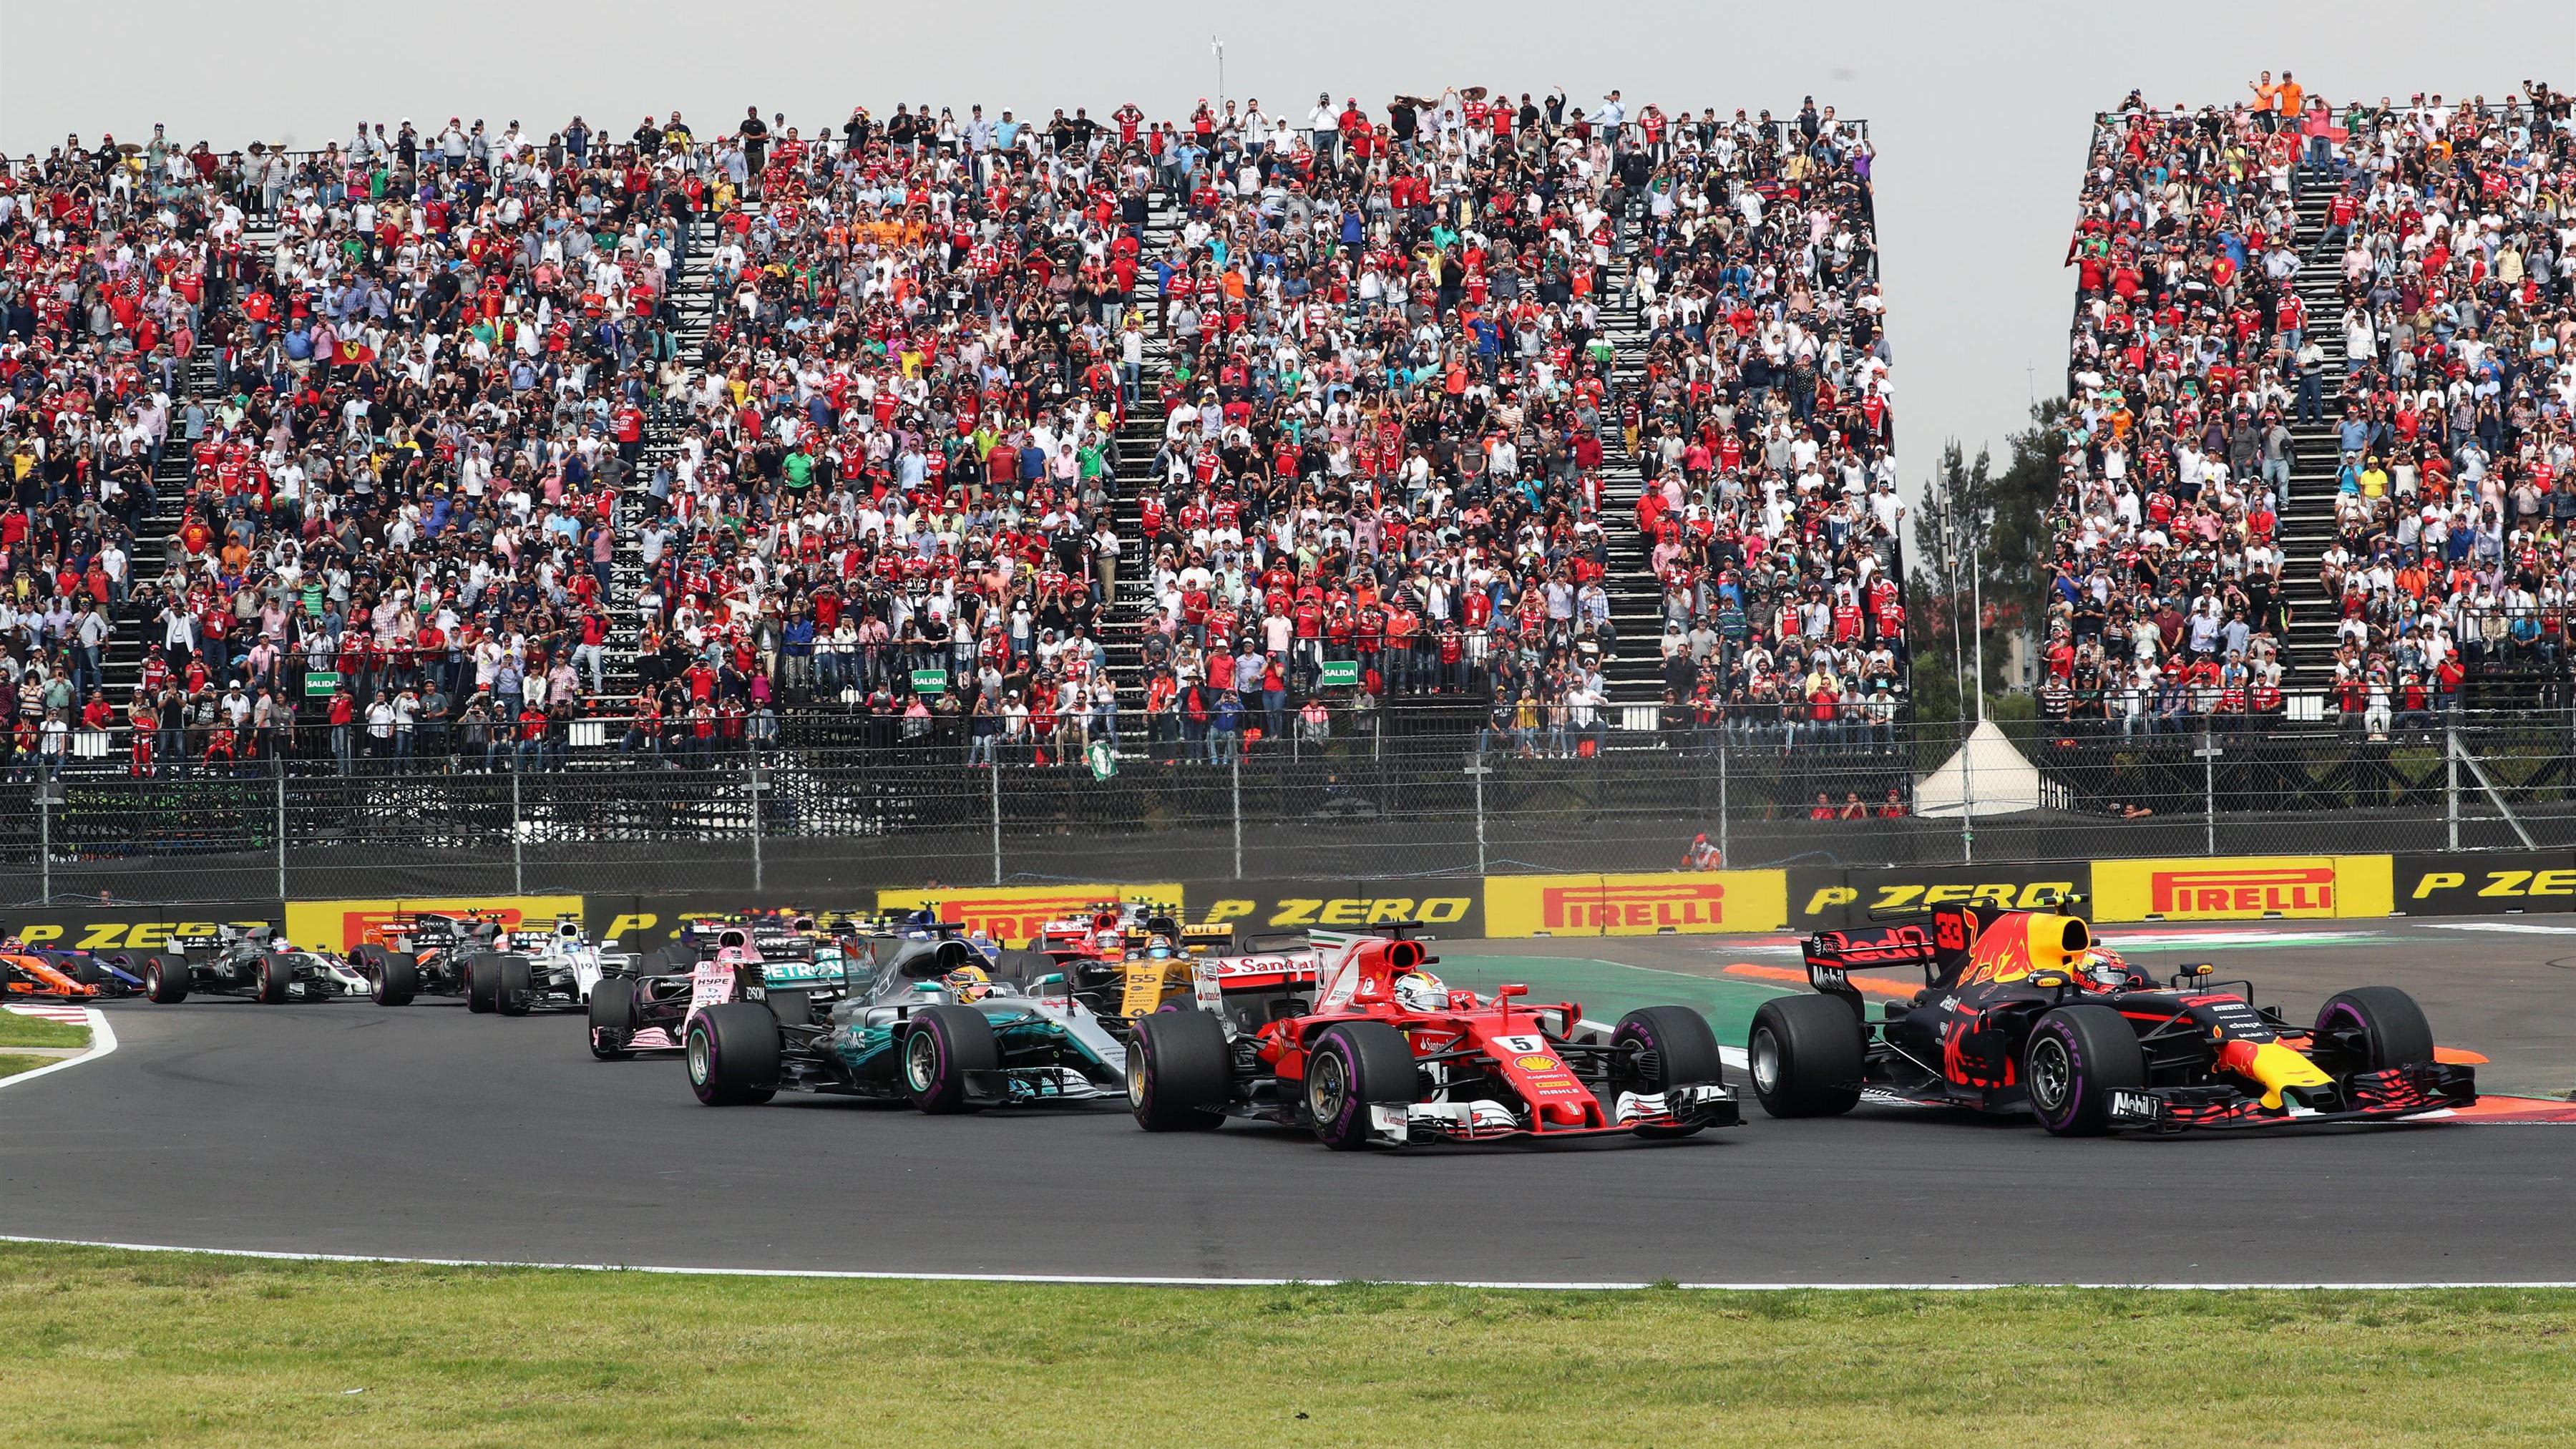 Strong growth for F1s TV and digital audiences in 2017